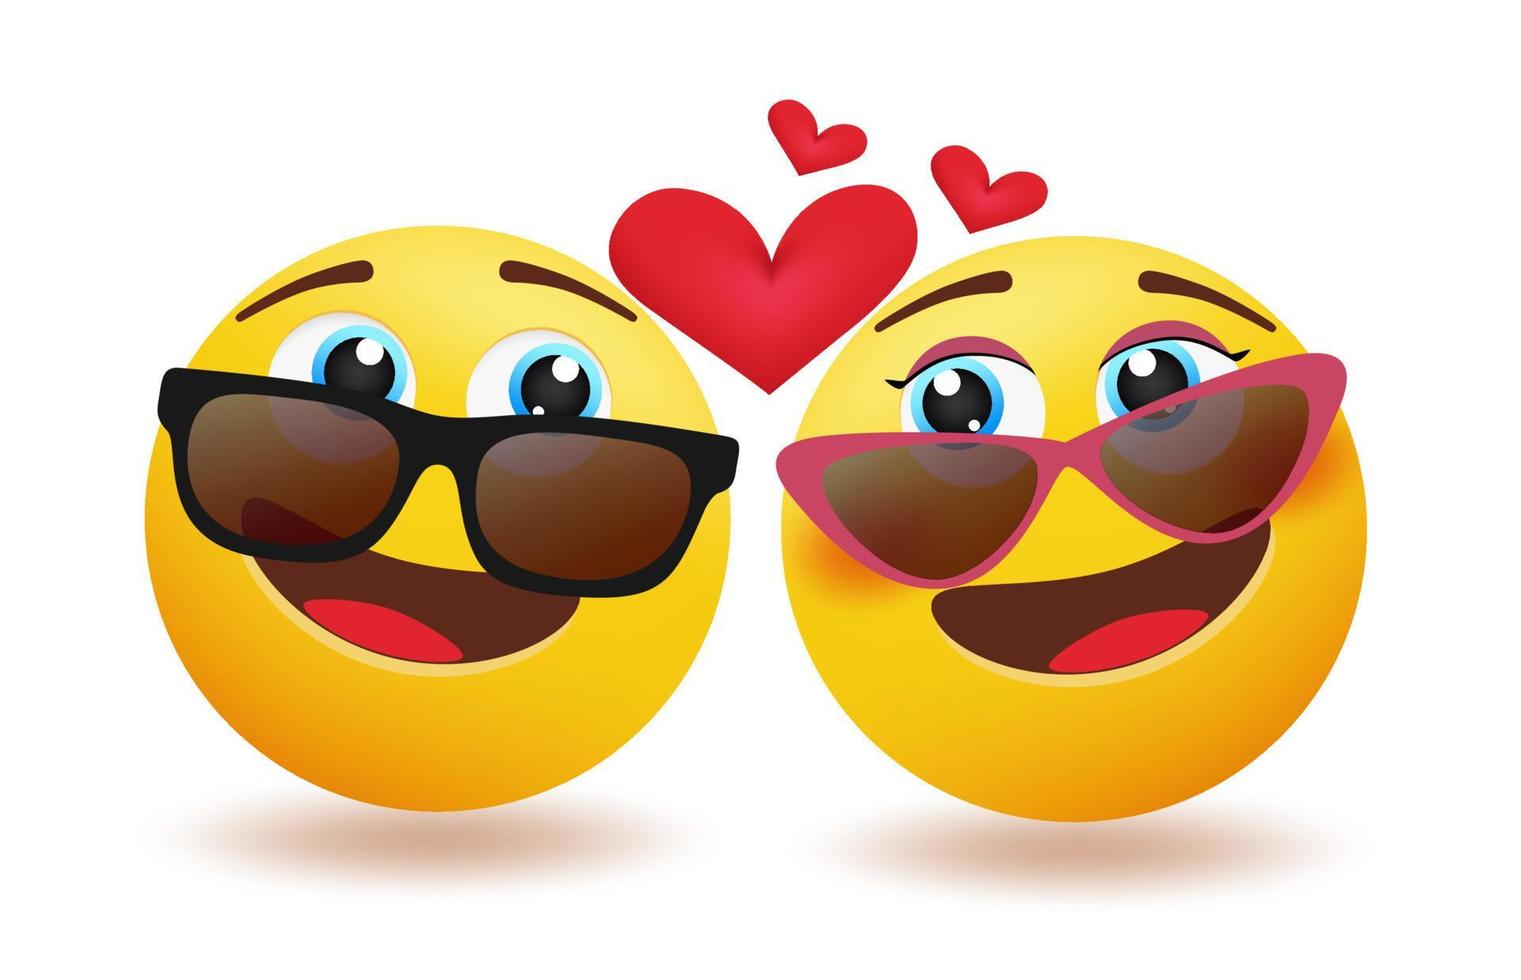 Emoji couple vector concept design. Emoticon 3d inlove lovers character with eyes looking each other wearing sunglasses for emojis valentine's day emoticons. Vector illustration.